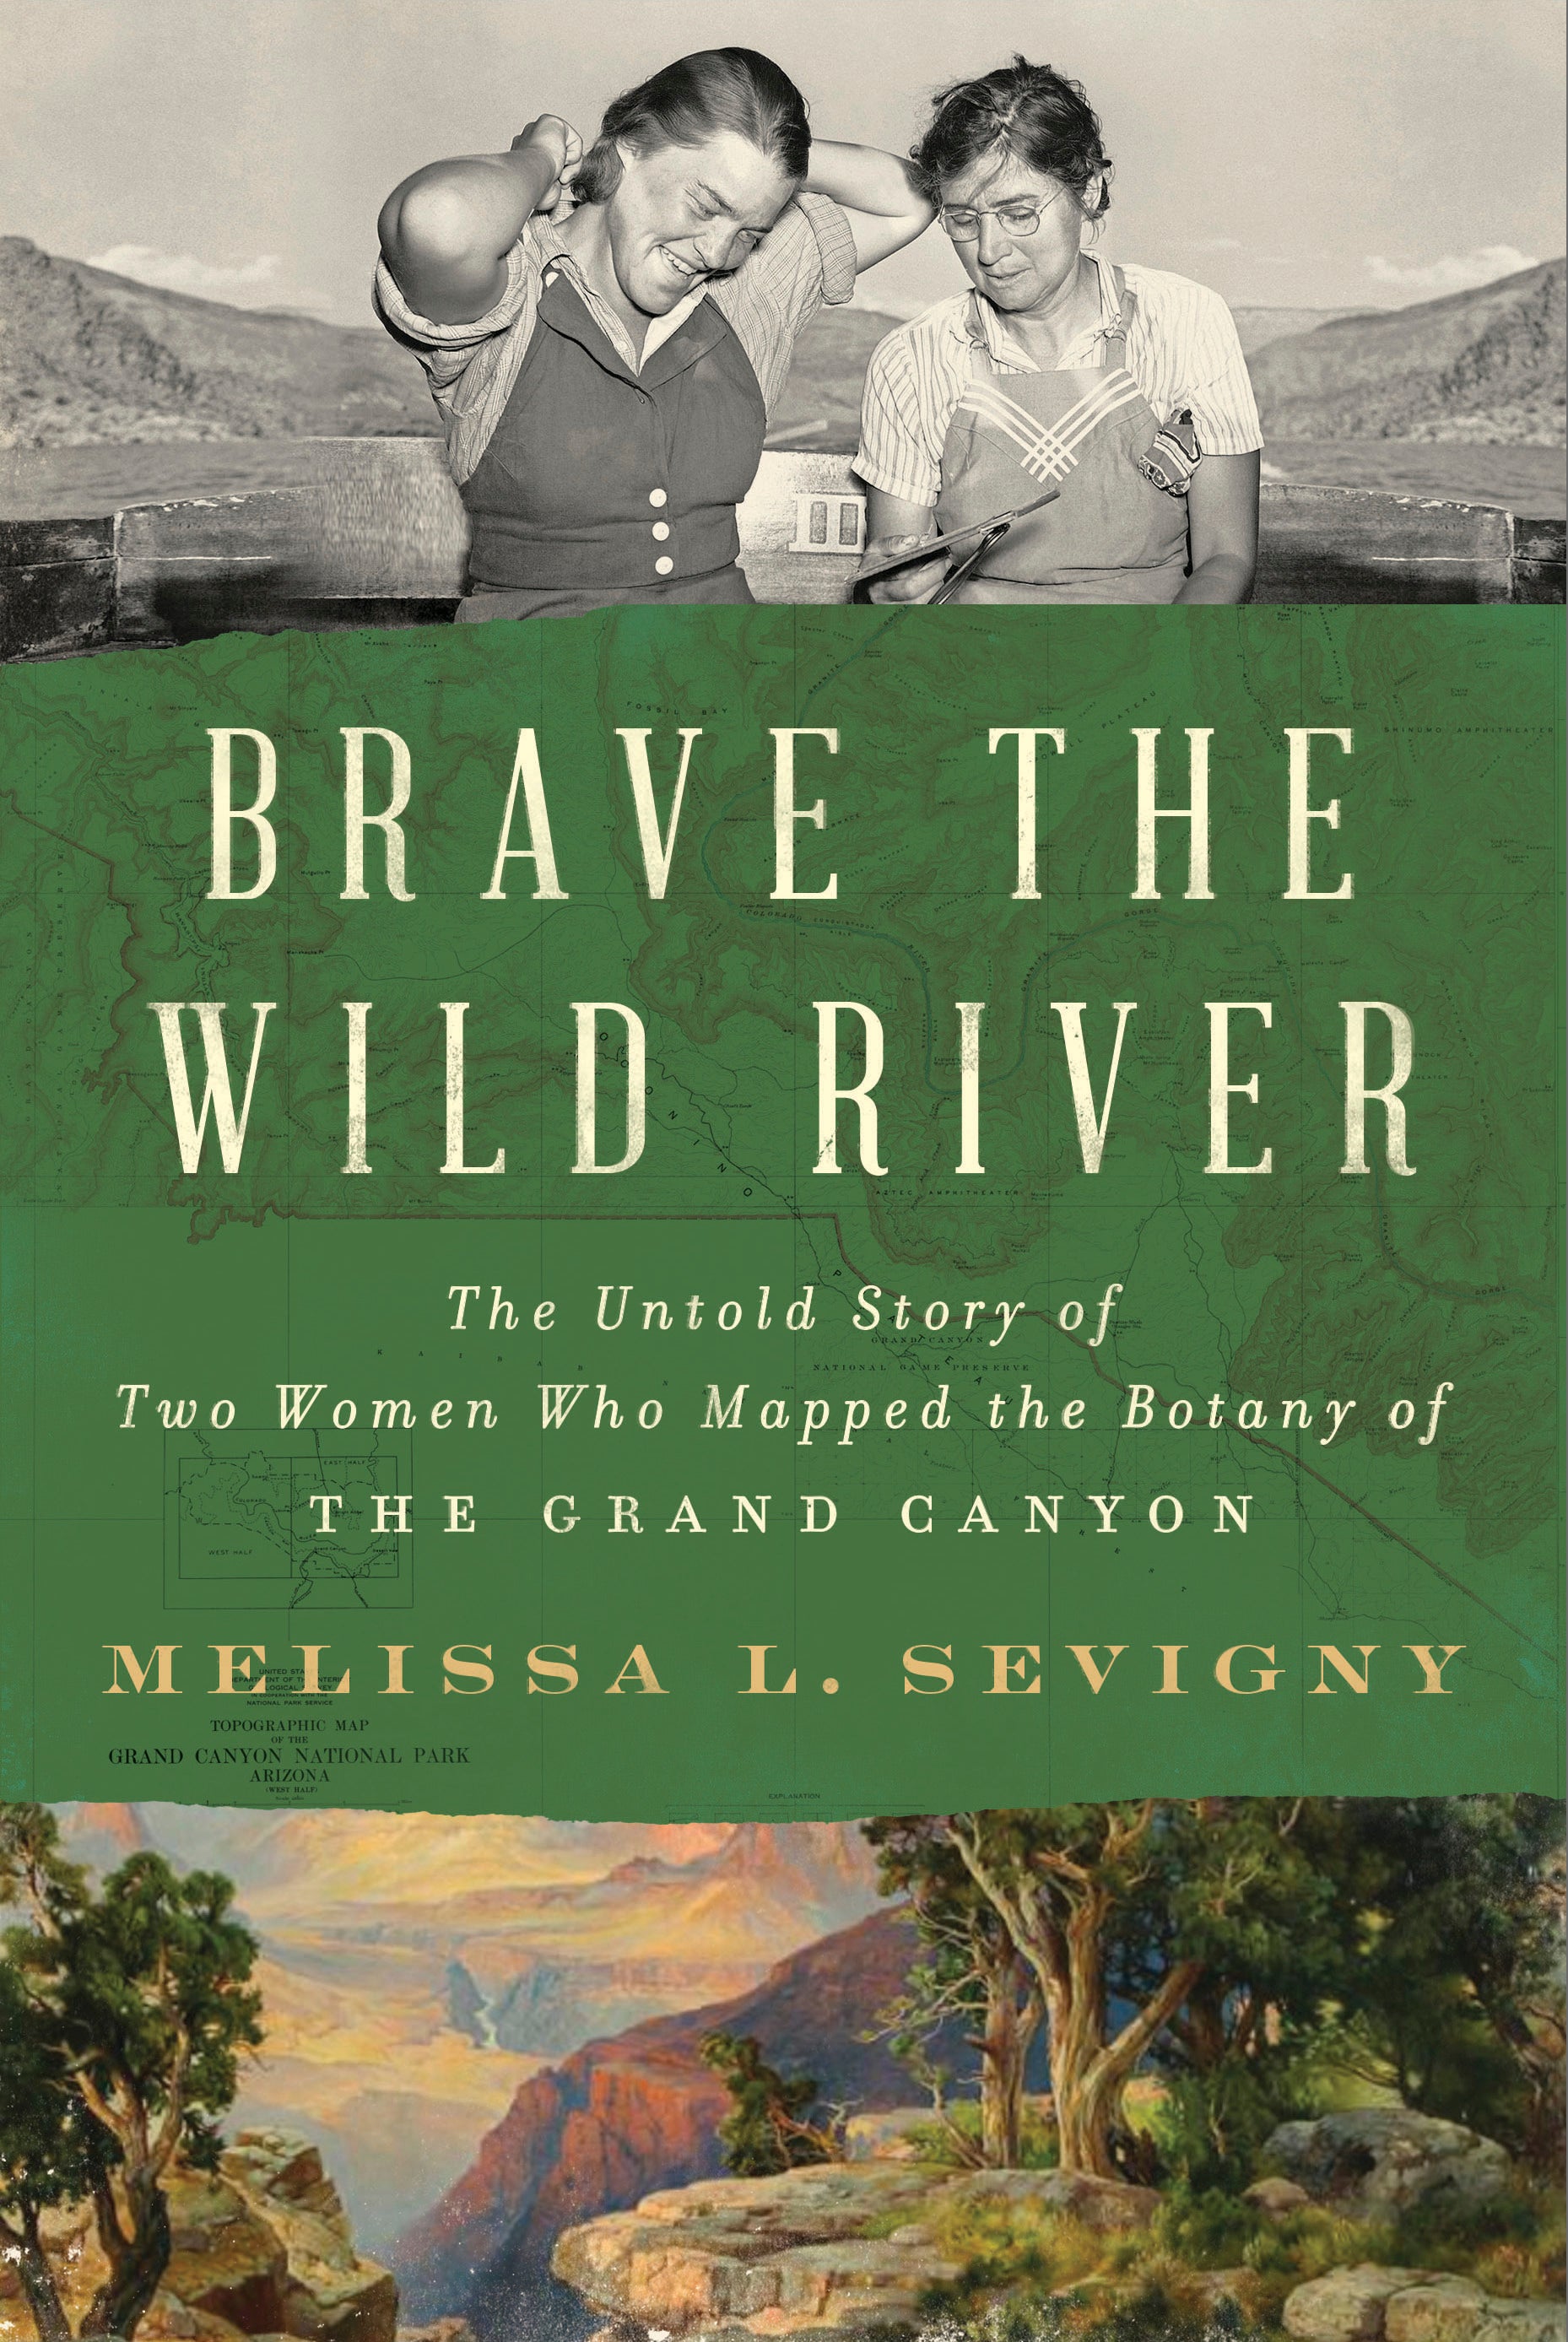 Book Review - Brave the Wild River